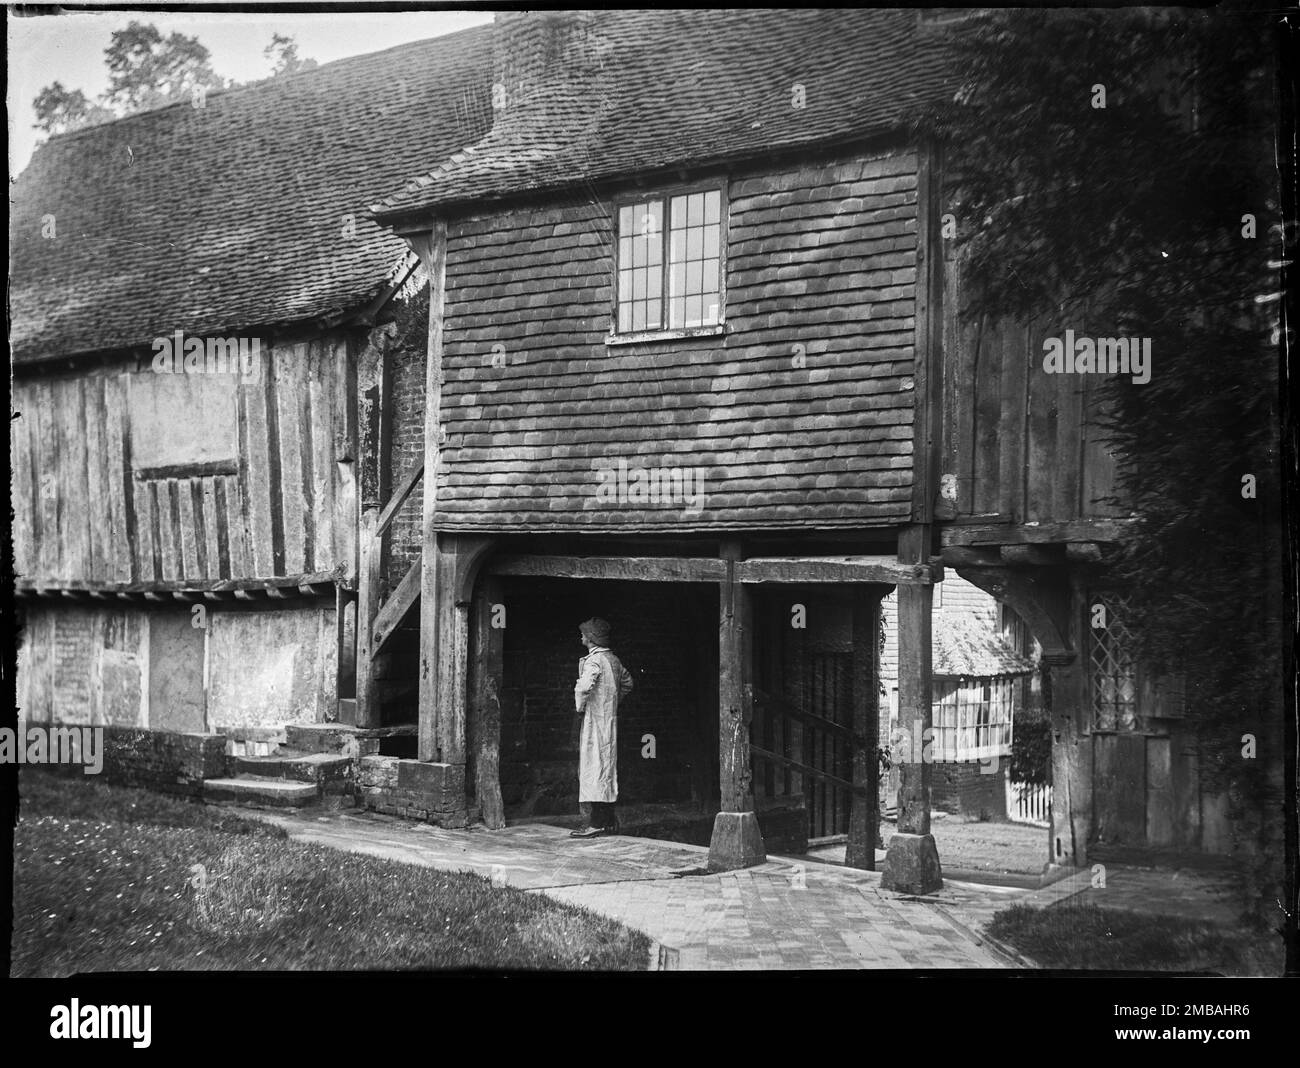 Leicester Square, Penshurst, Sevenoaks, Kent, 1911. A view from the north-west showing a figure standing under the archway in Leicester Square, Penshurst, looking at one of the timbers of the lych gate leading to St John's Church. Stock Photo